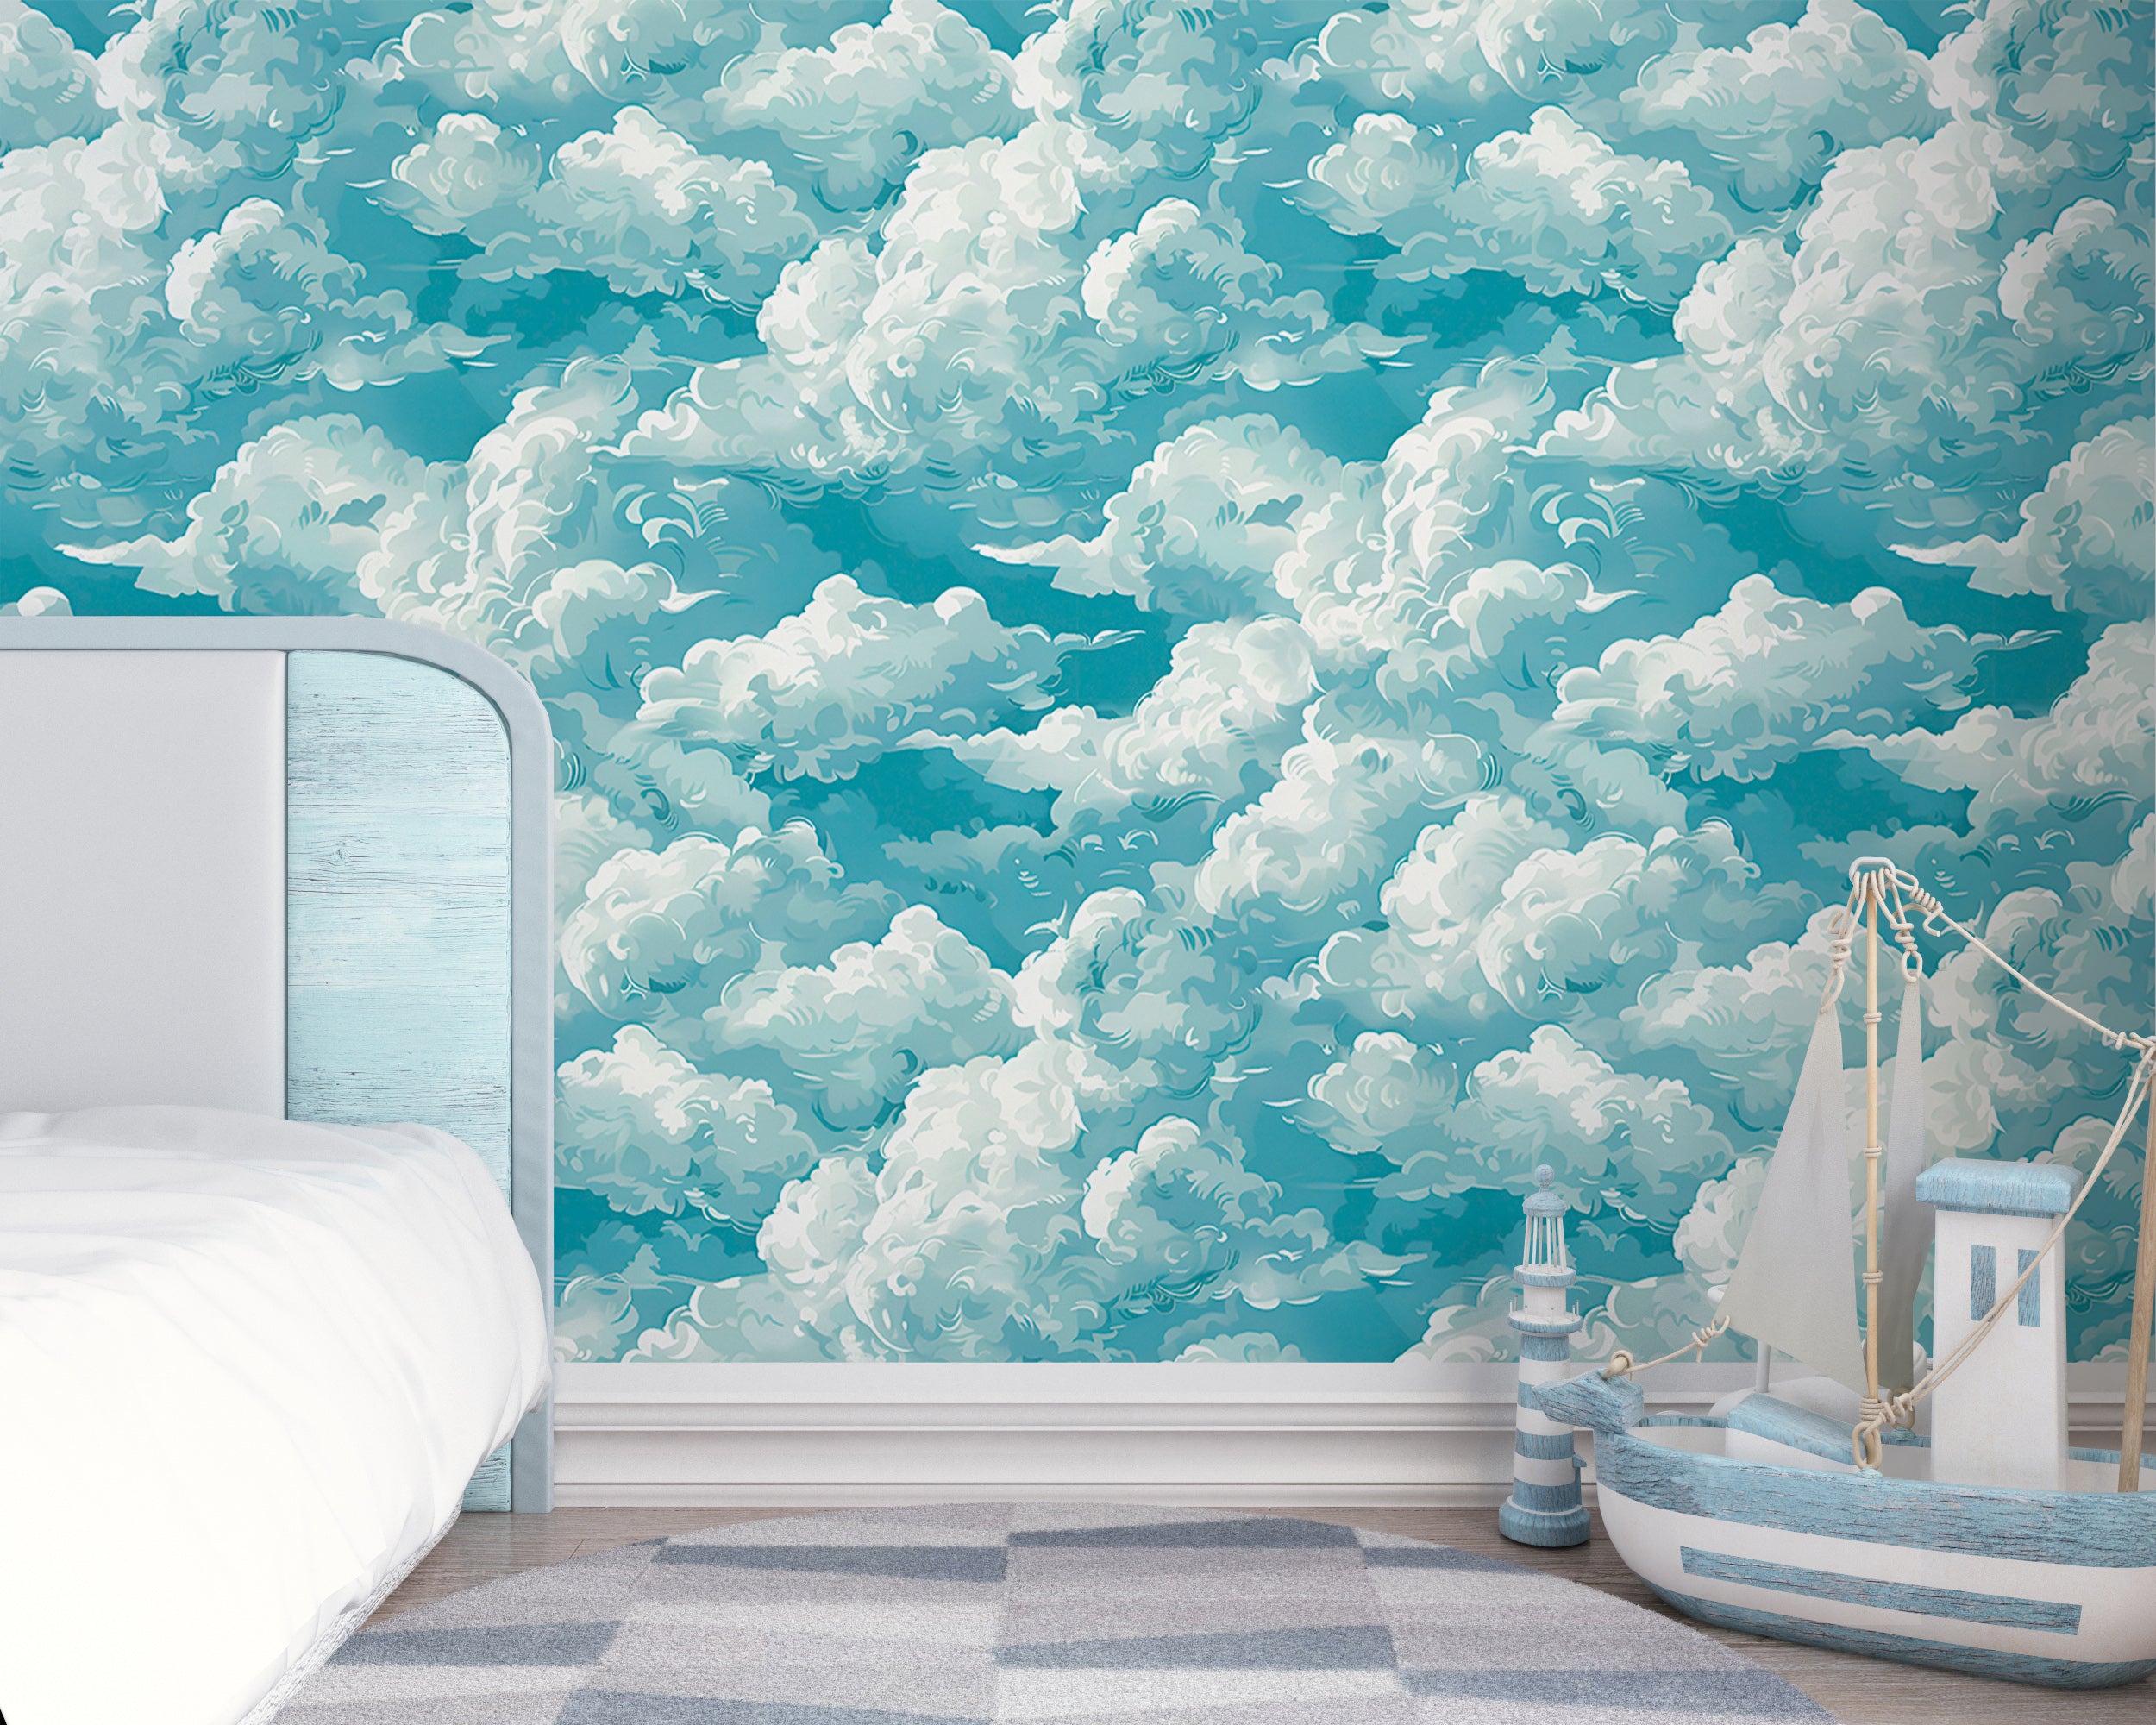 Removable blue and white clouds wallpaper Watercolor nursery cloud pattern wallpaper